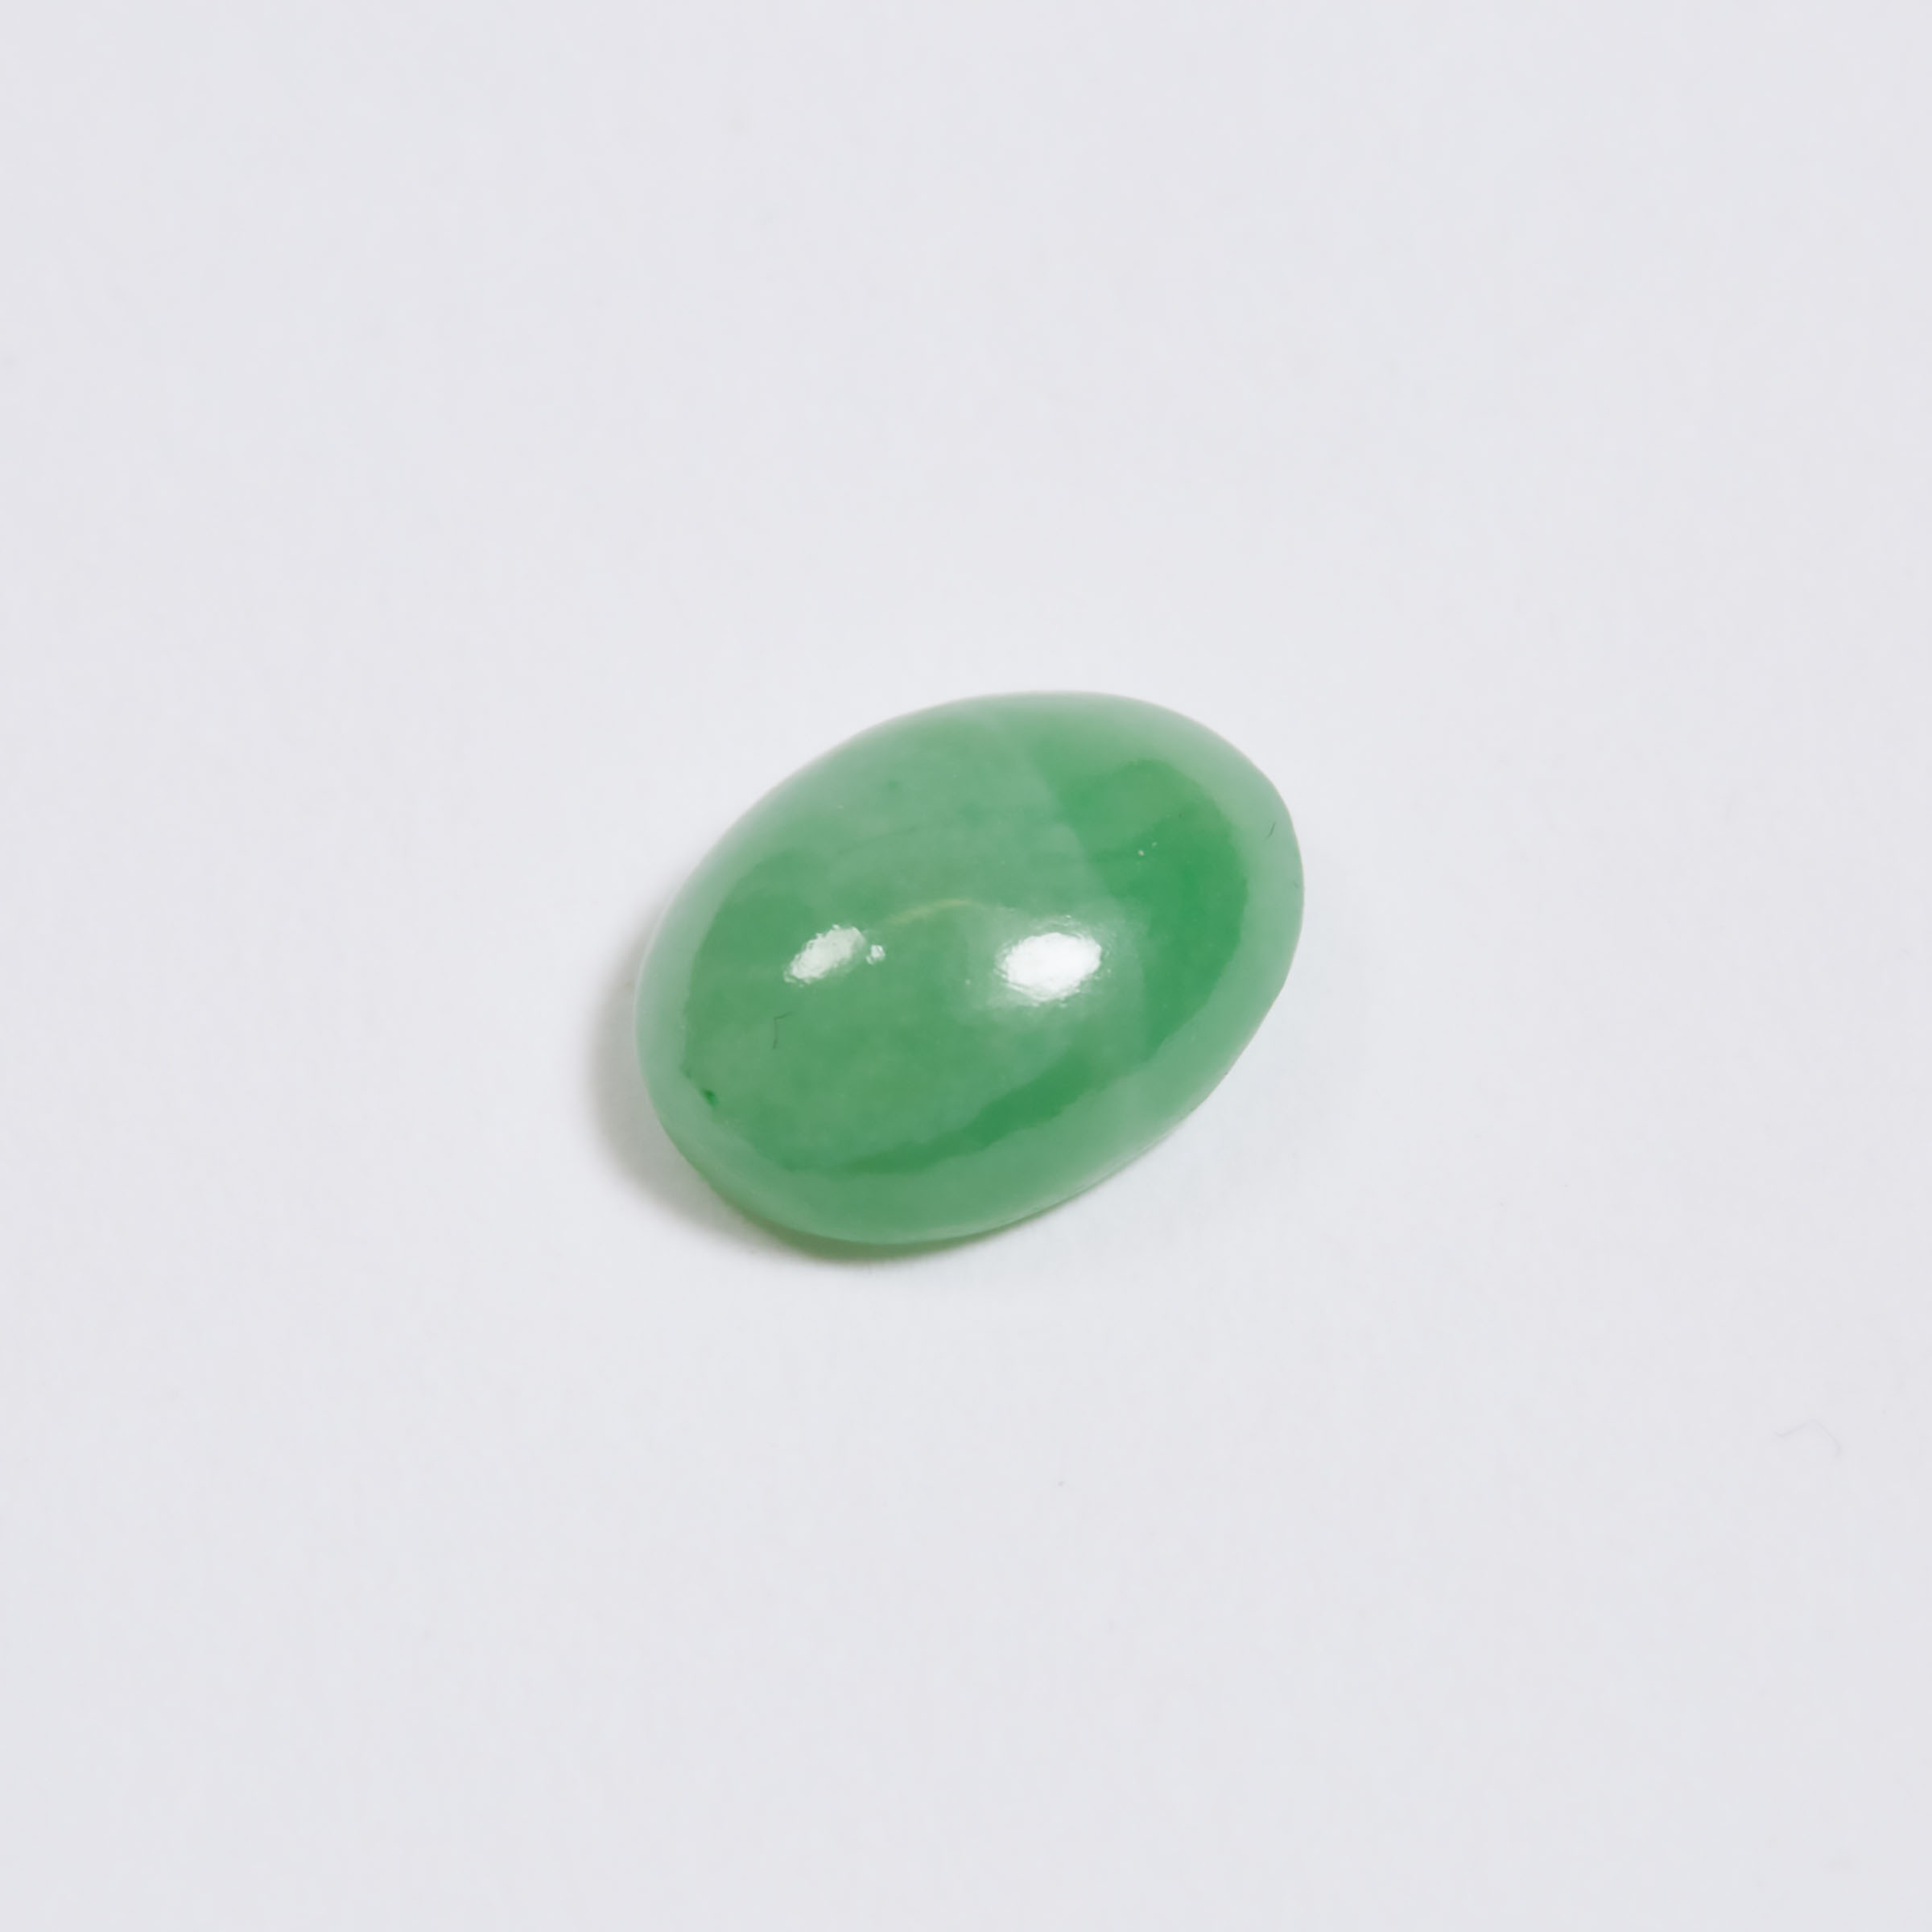 An Unmounted Natural Oval Jadeite Cabochon